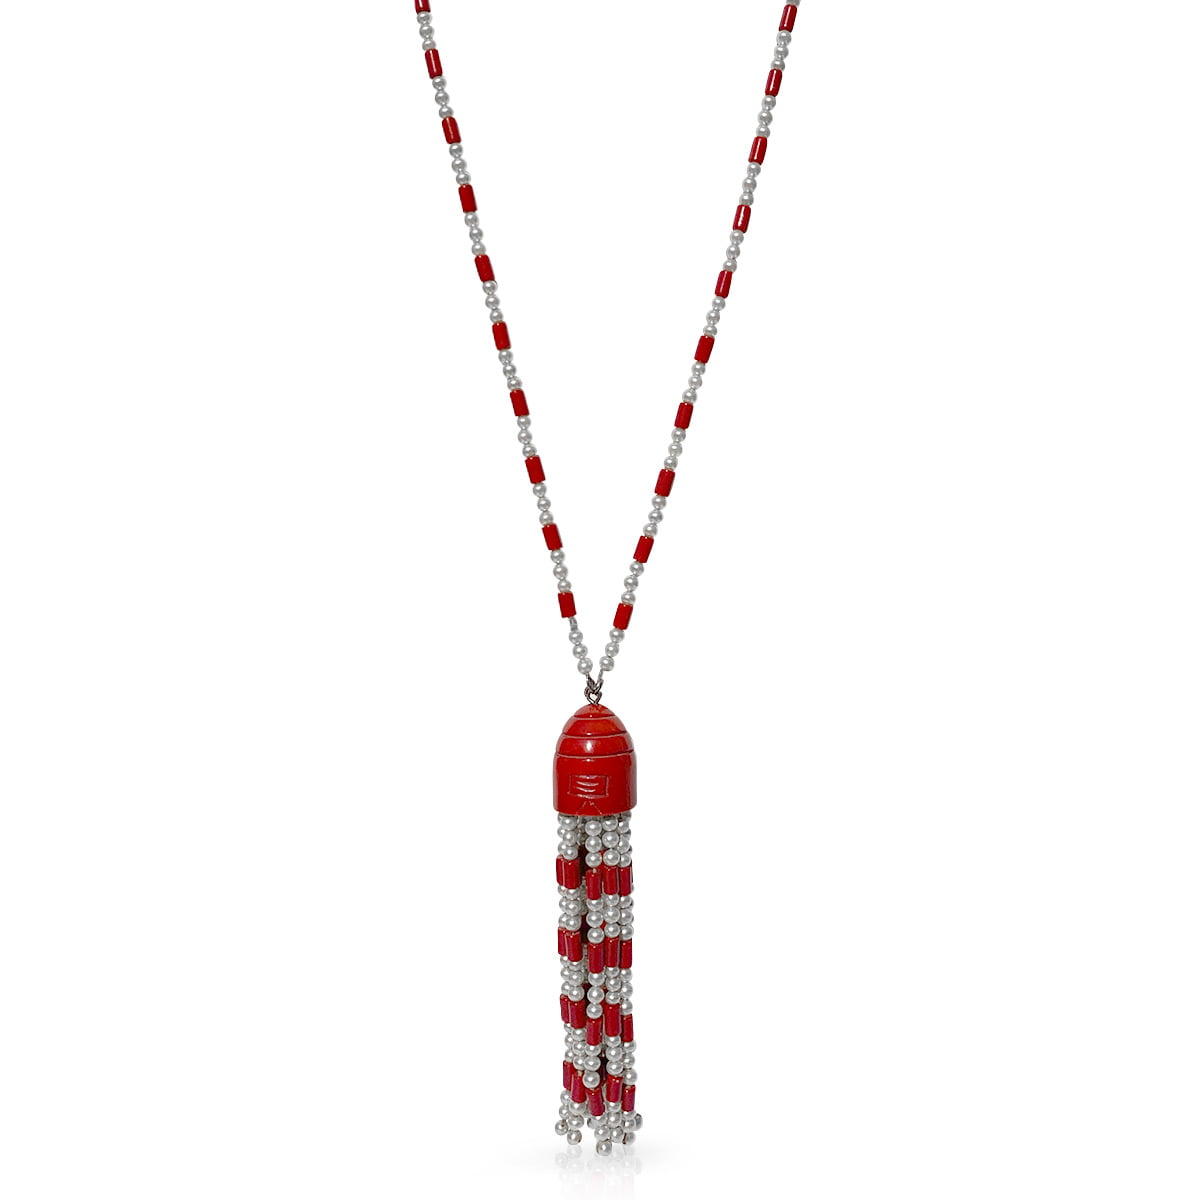 Art Deco red and white glass sautoir